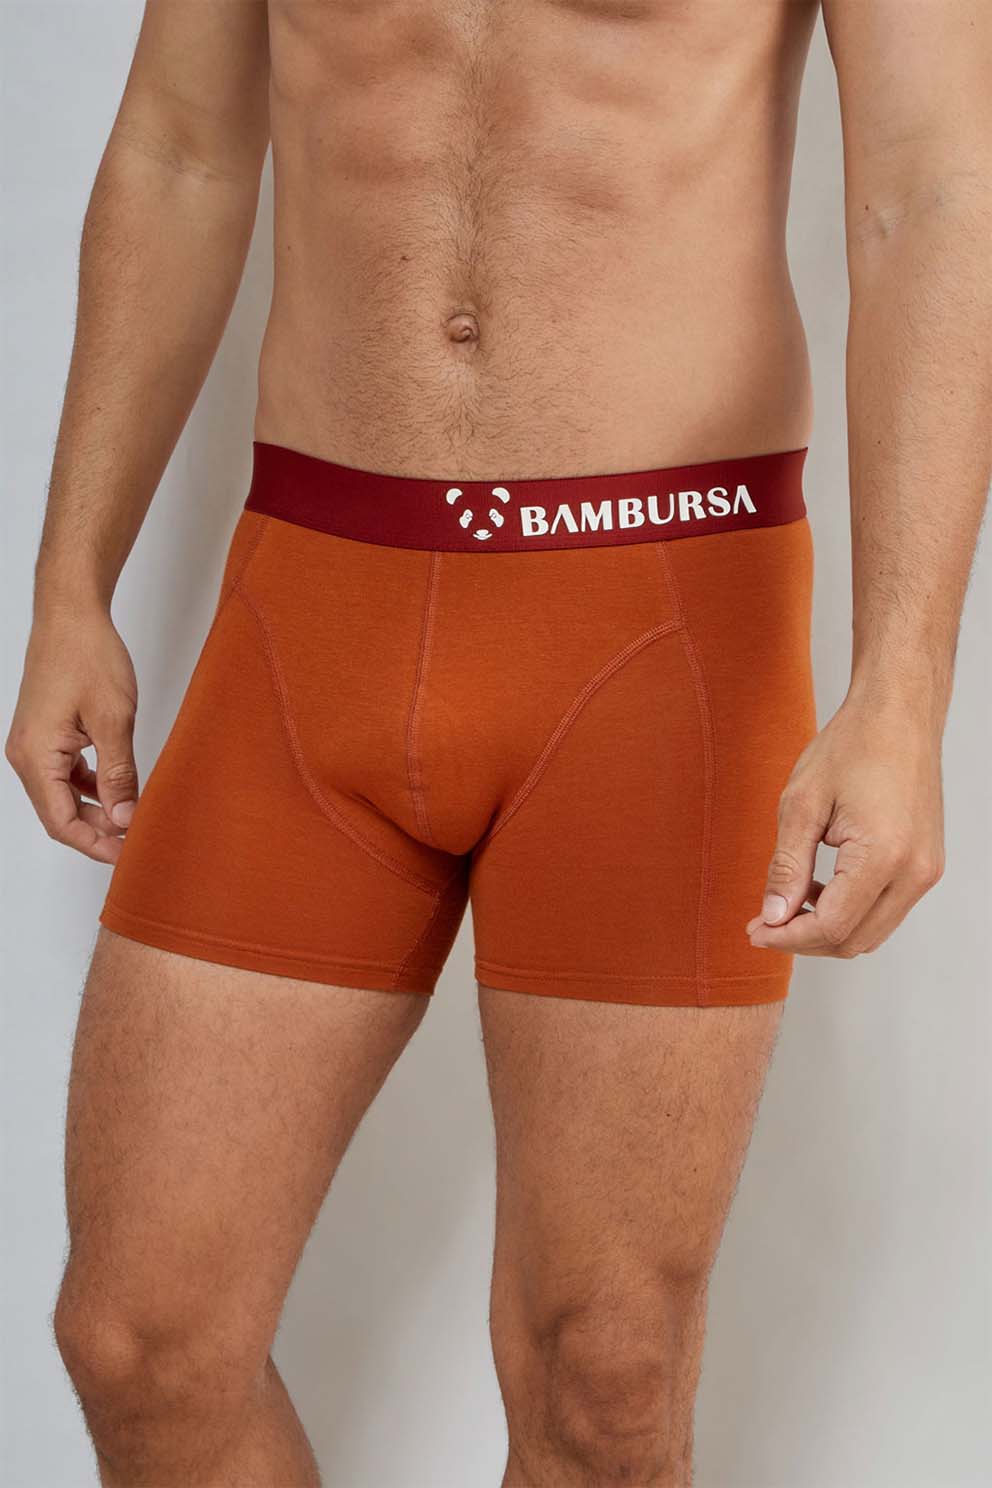 Bamboo Big Size Boxer, Men's big and tall boxers